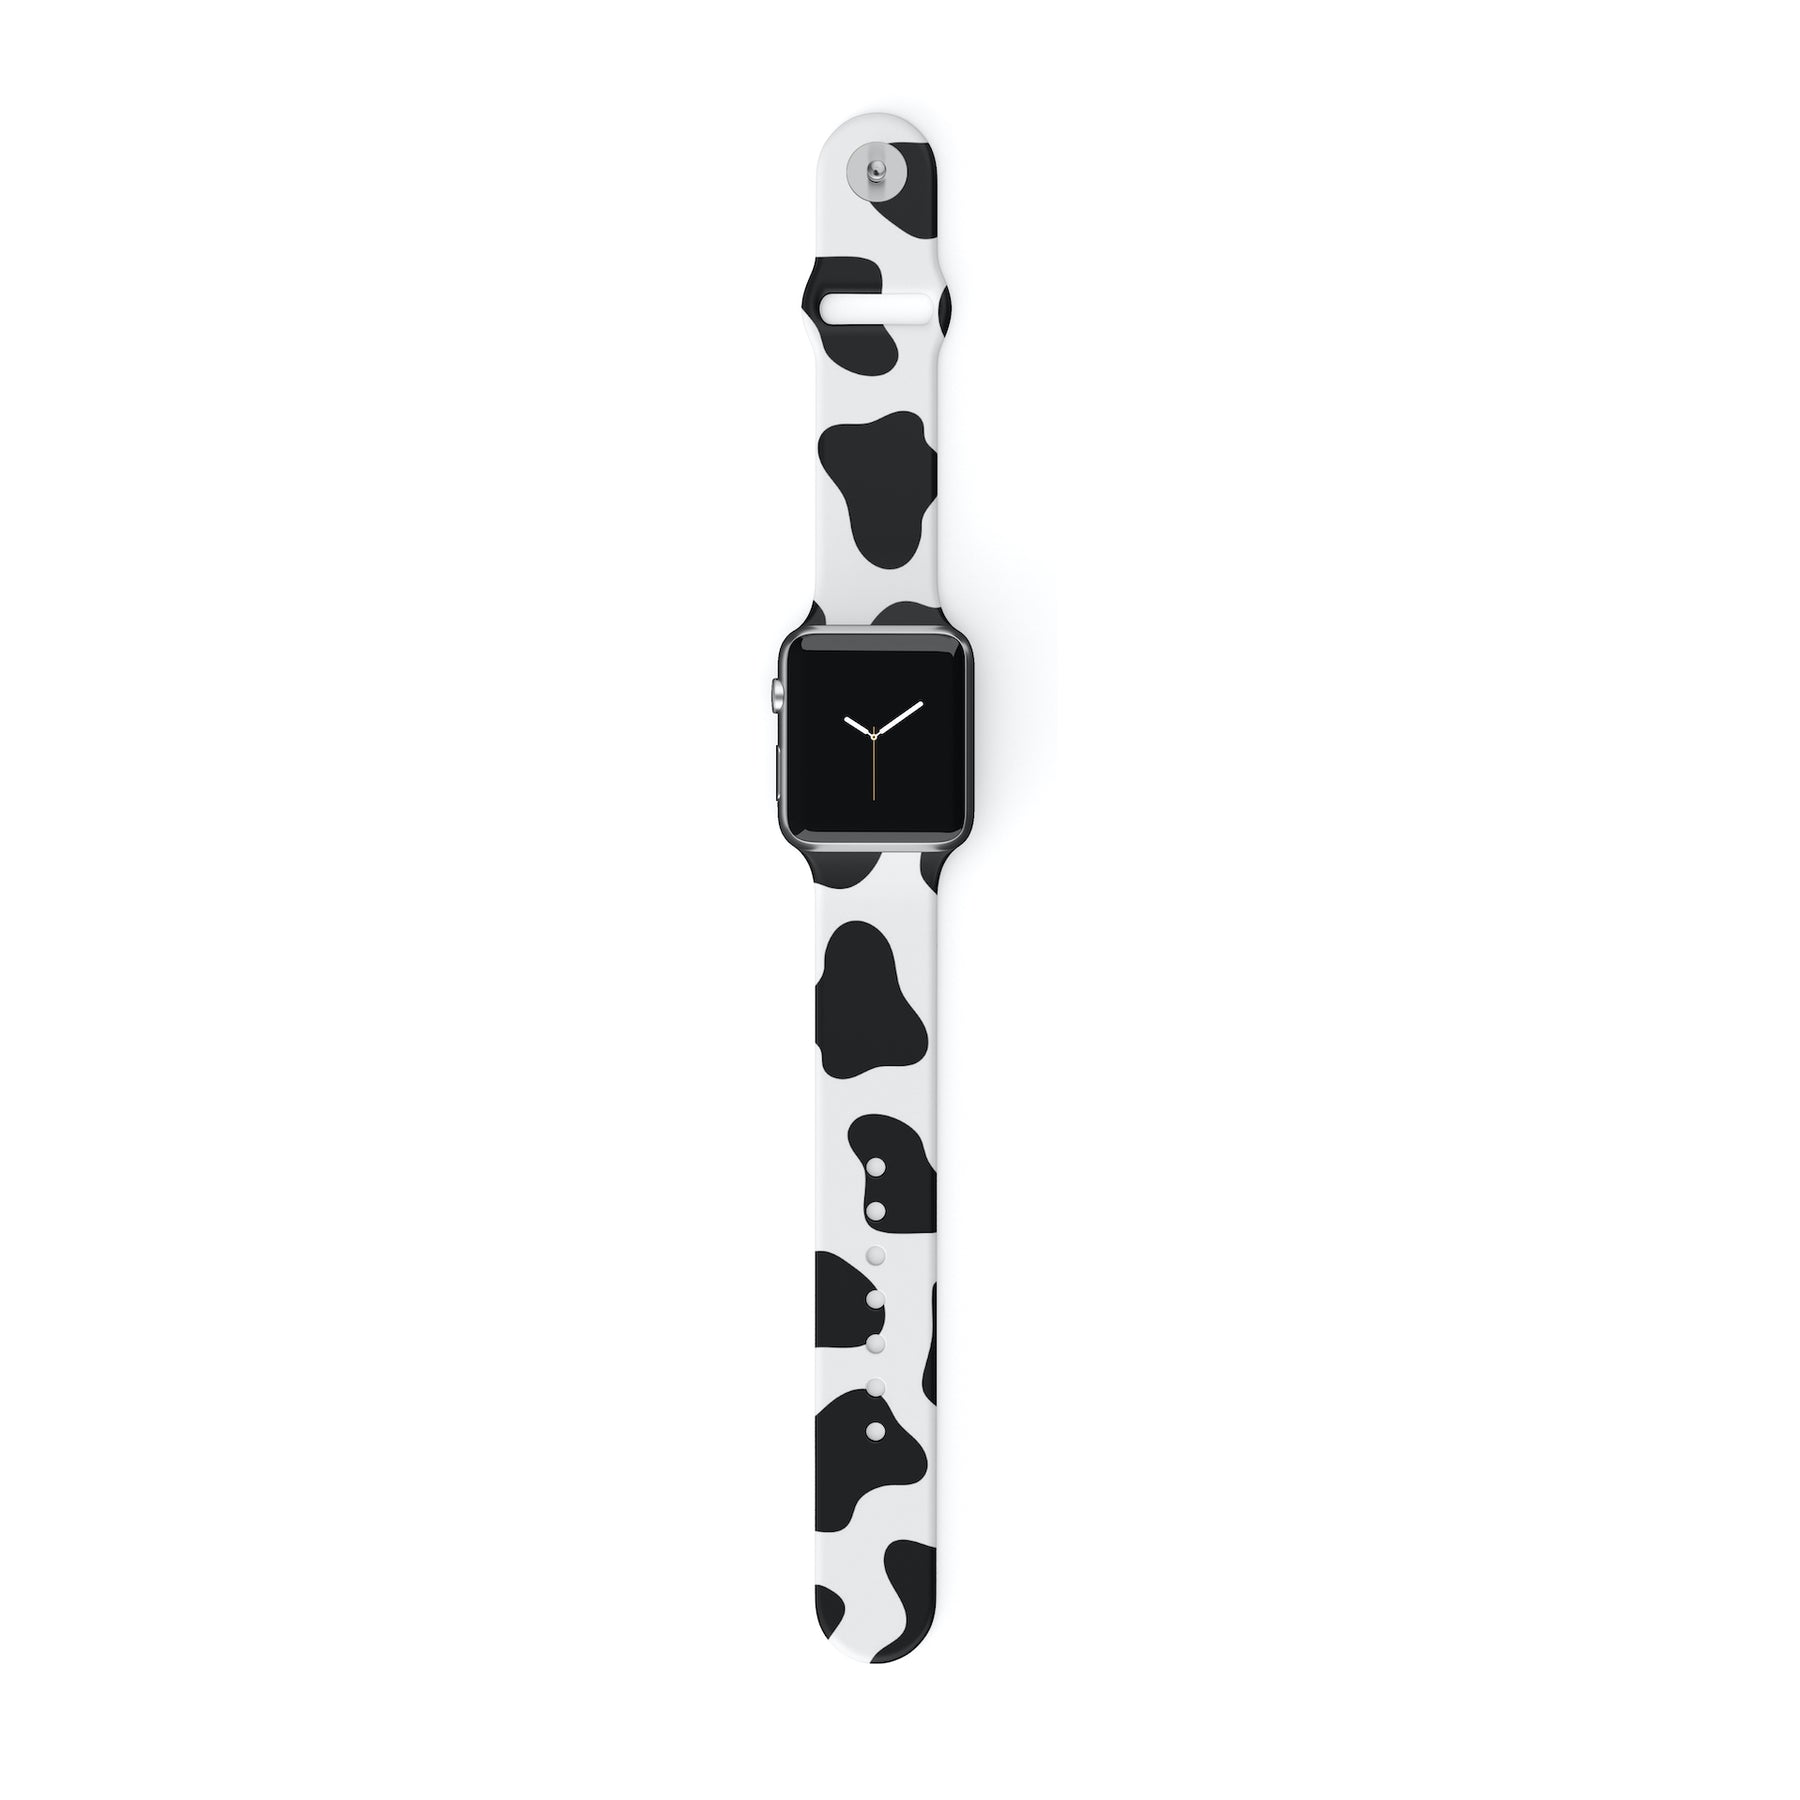 Cow Print Black Apple Watch Strap - thefonecasecompany